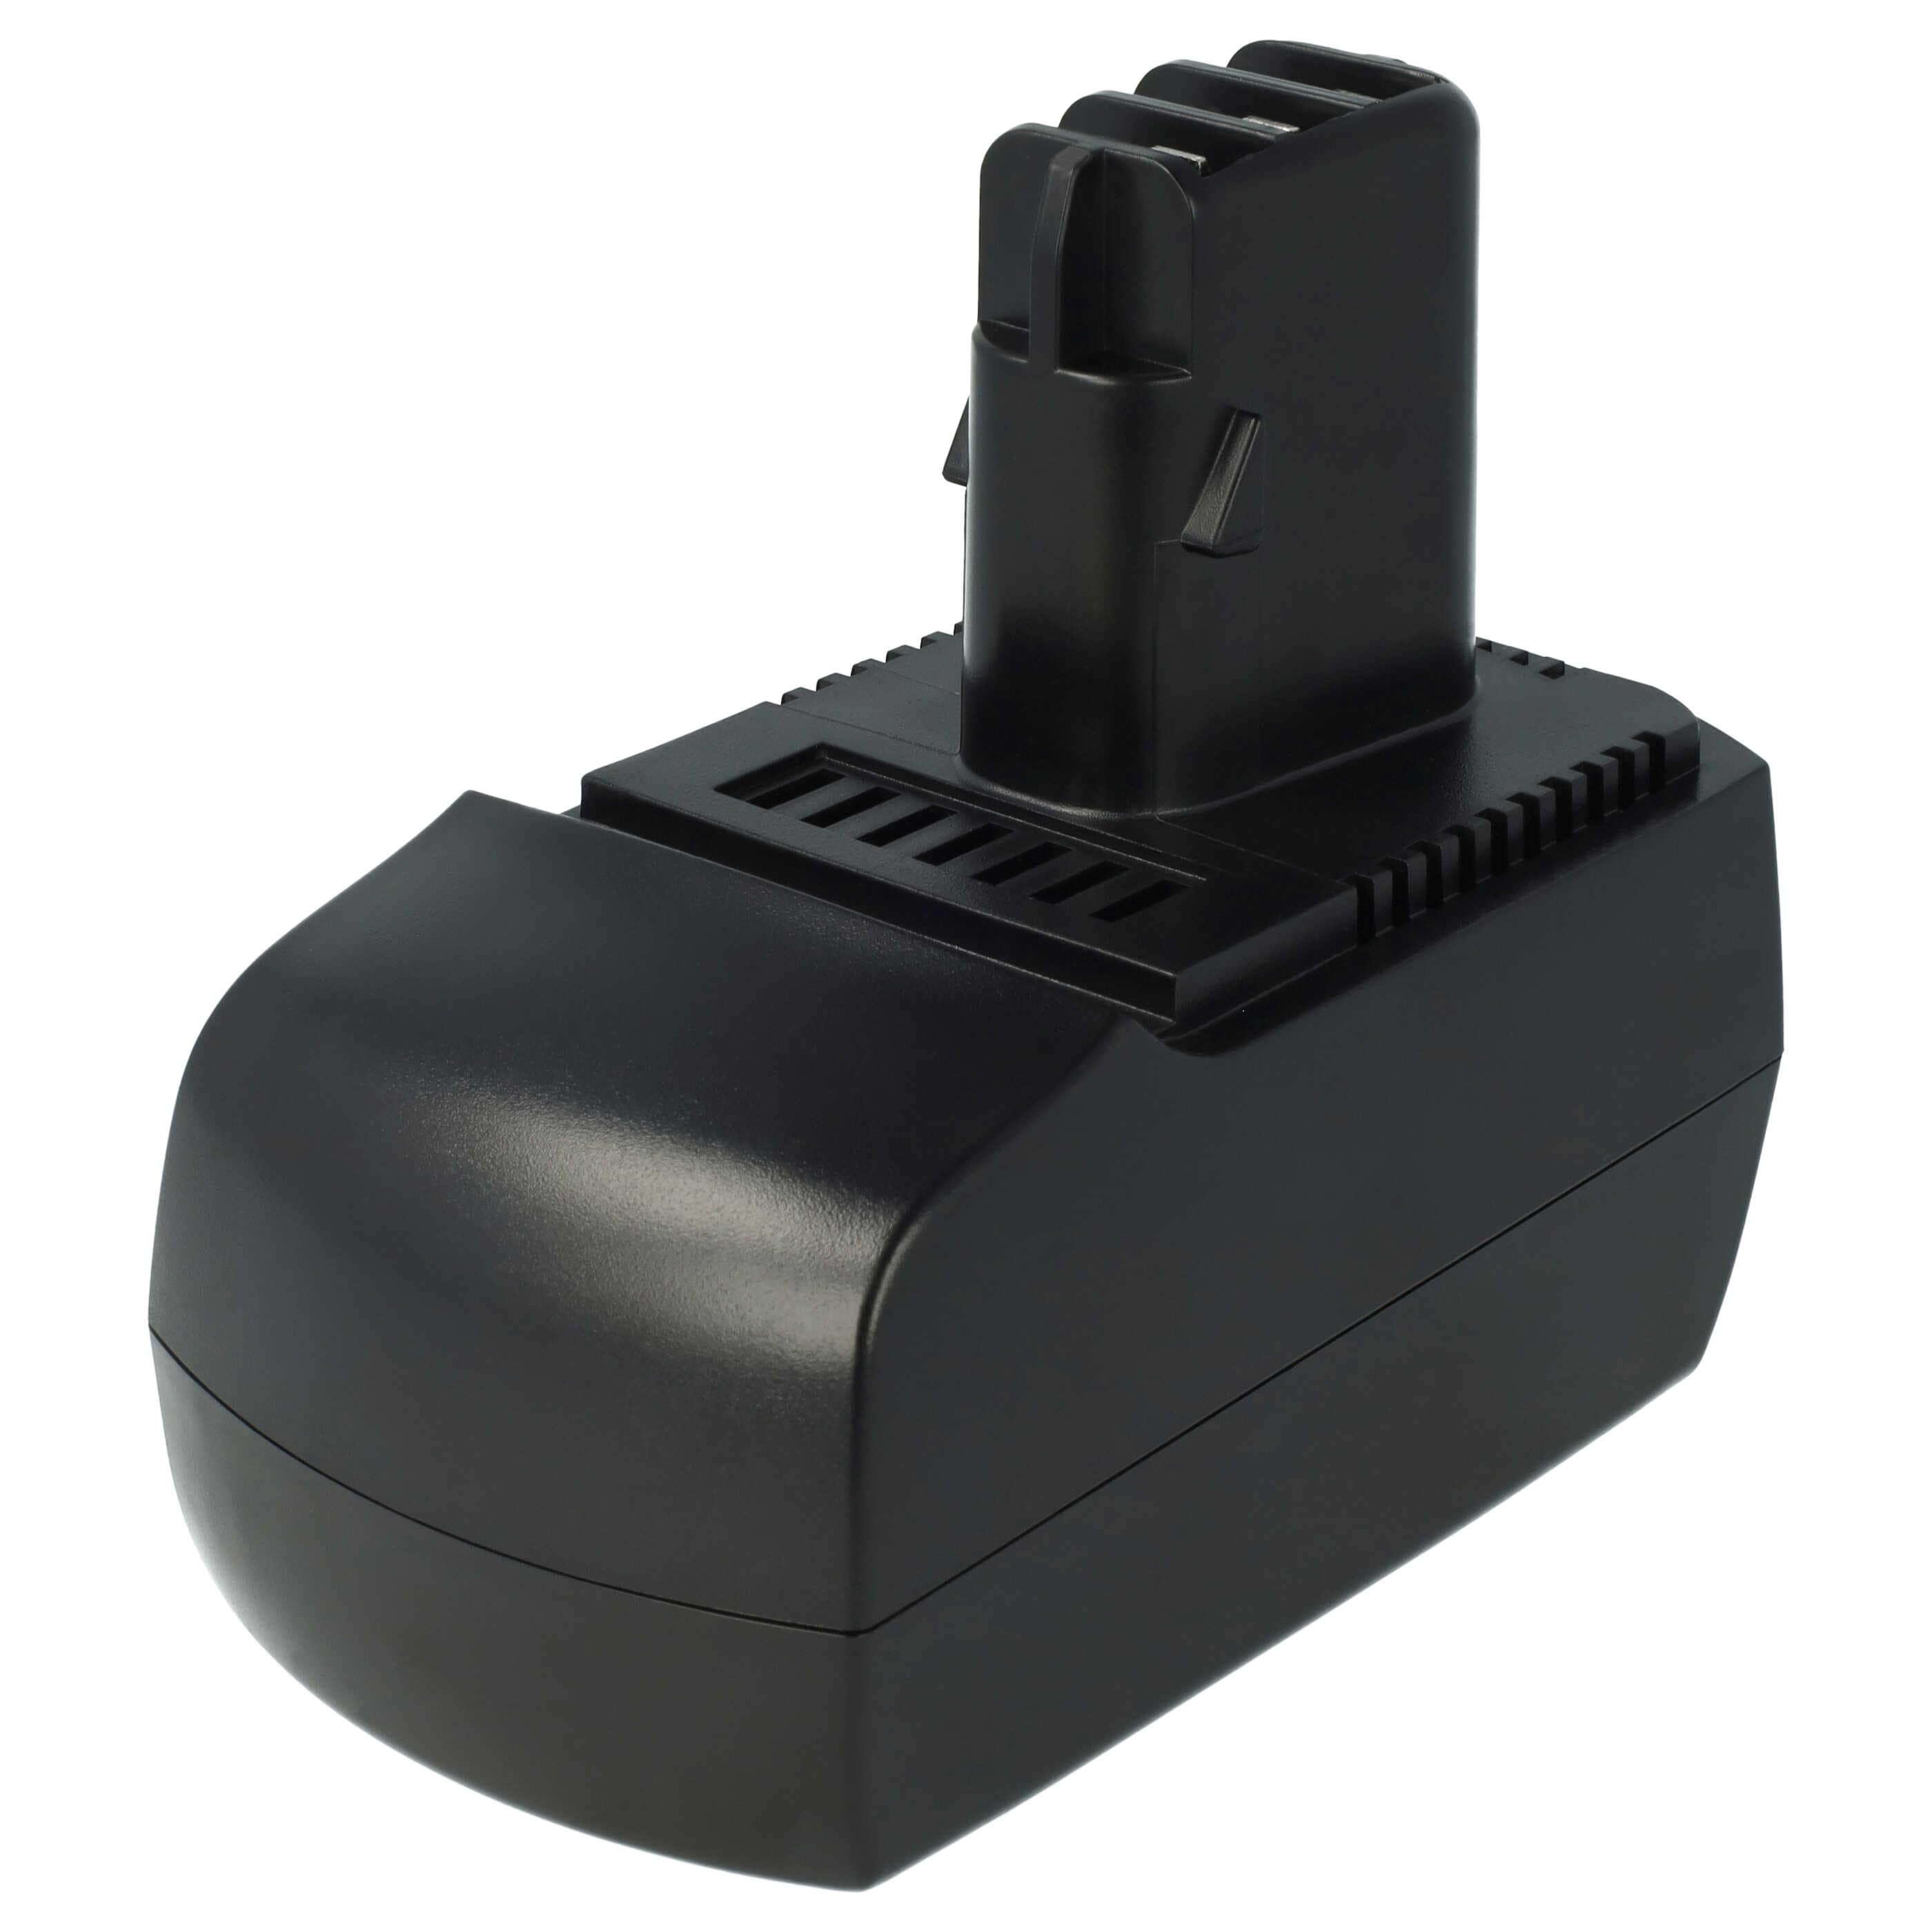 Electric Power Tool Battery Replaces Metabo 6.25475, 6.25476, 6.25482, 6.25481 - 3000 mAh, 14.4 V, NiMH